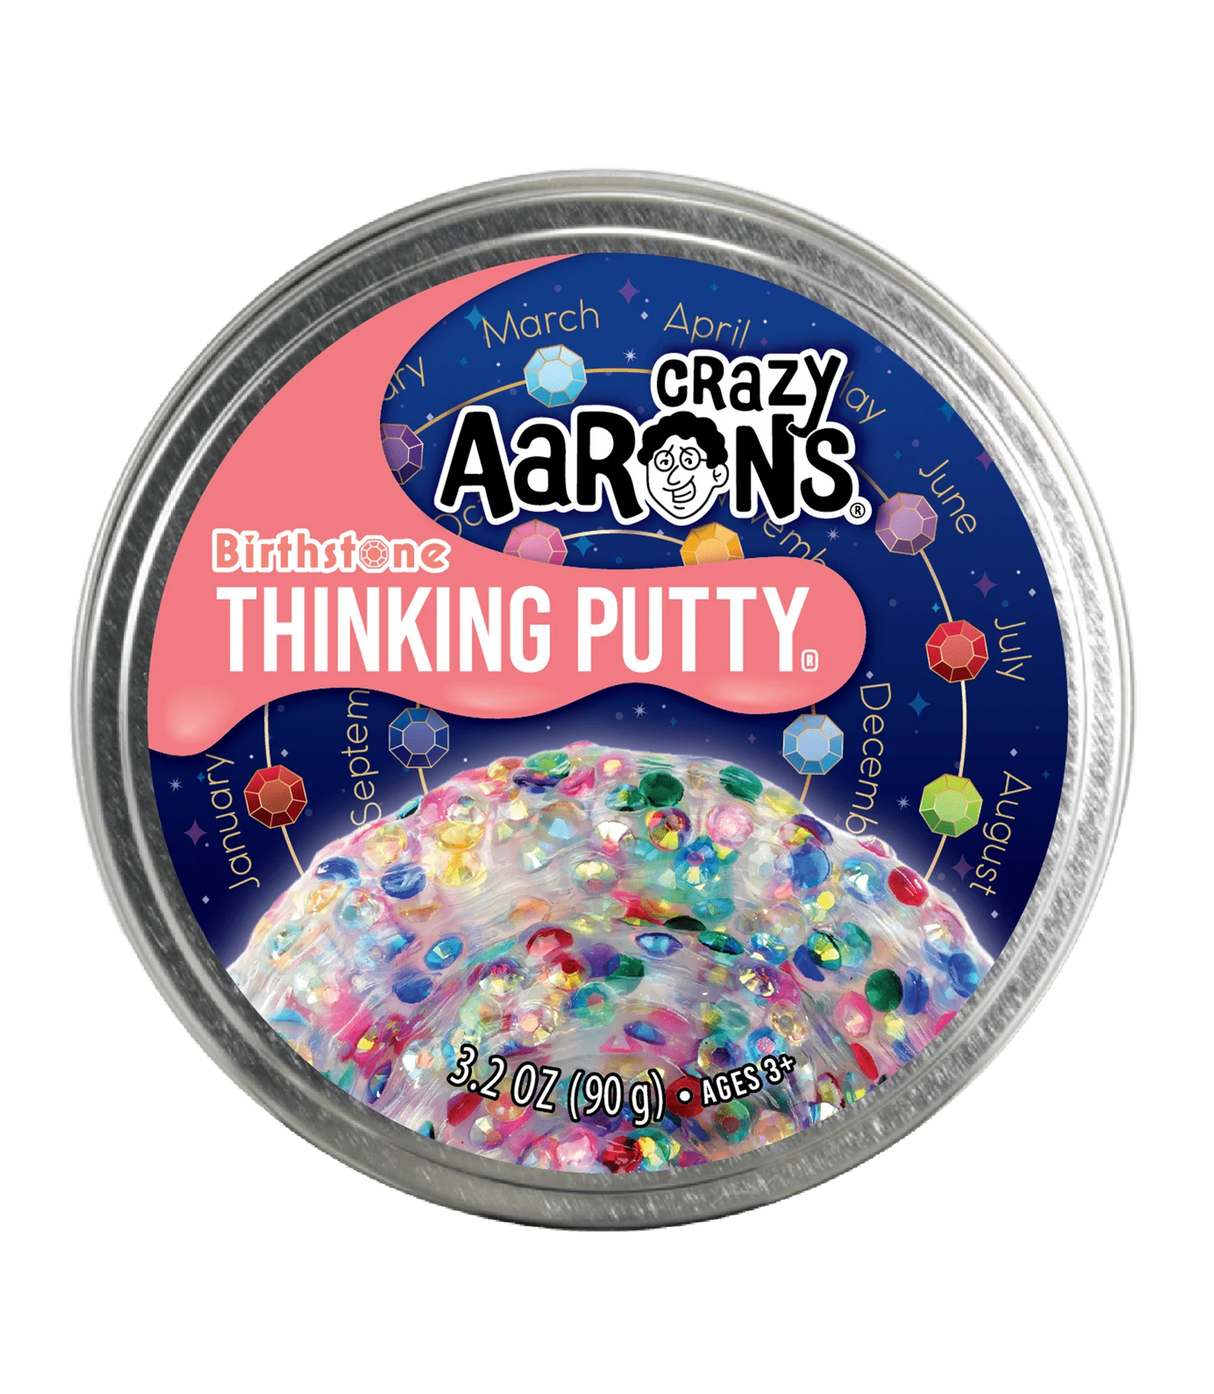 Trendsetters Birthstone Thinking Putty